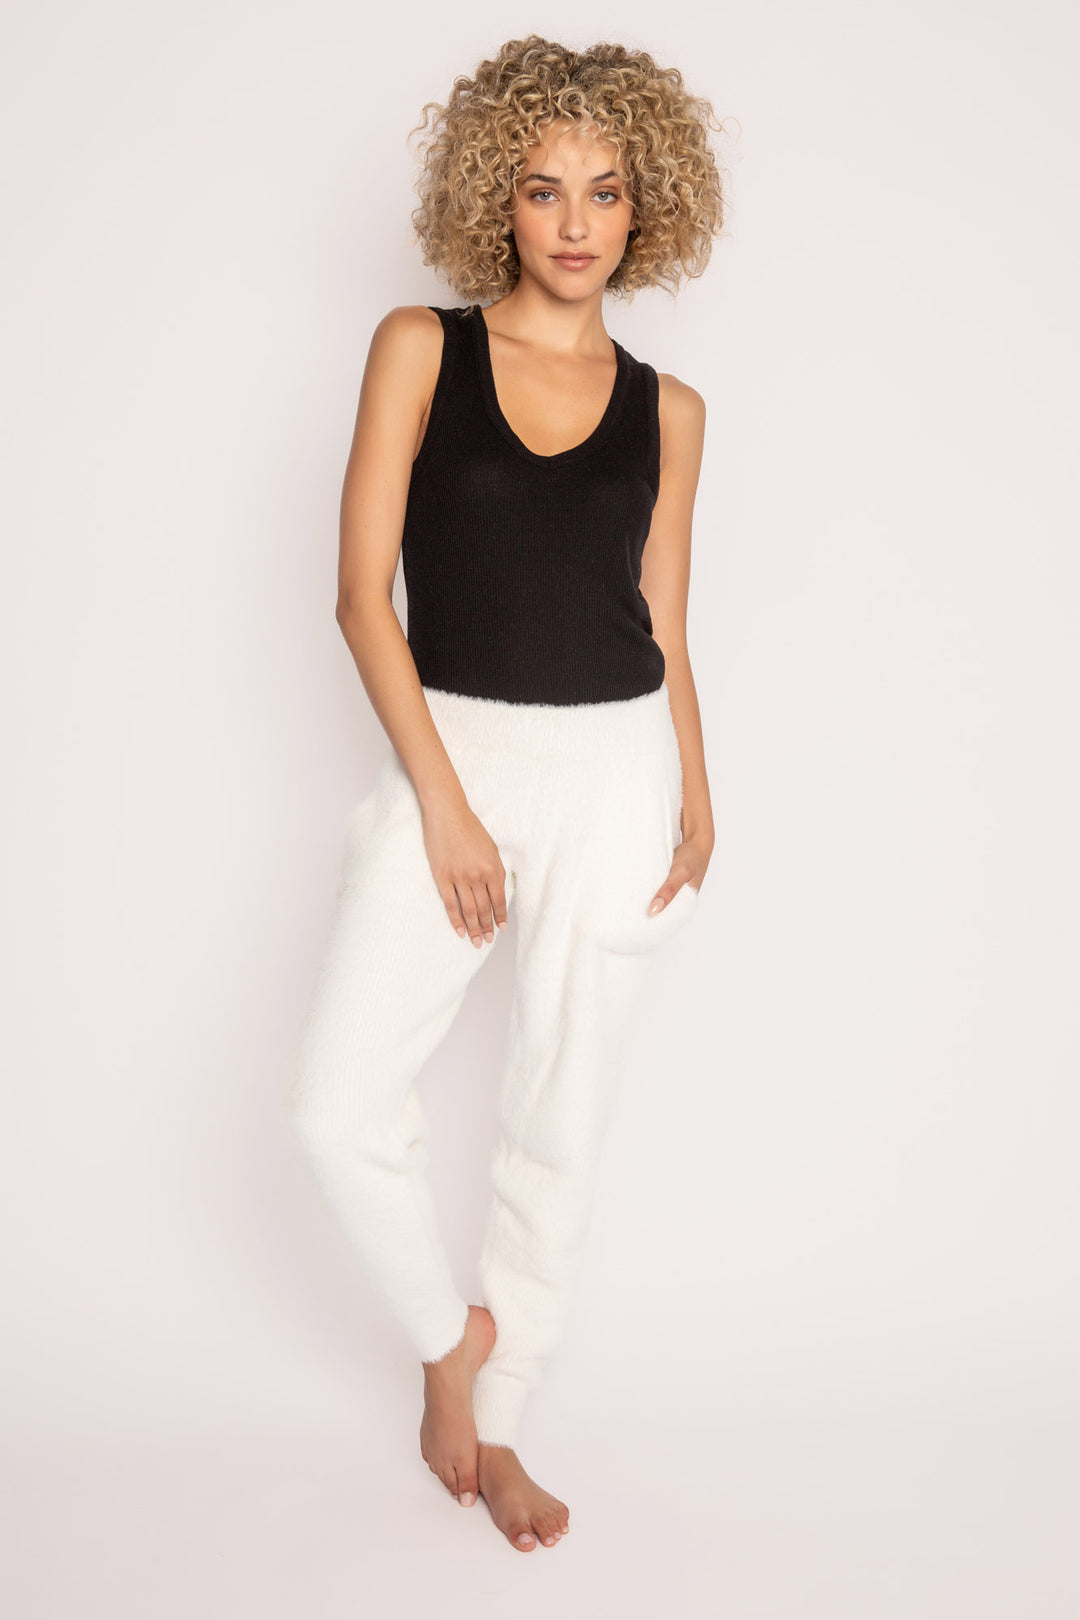 Soft ivory feather knit jogger sweater pant, with relaxed fit. Ribbed cuffs, tie waist & front pockets. (7257680216164)